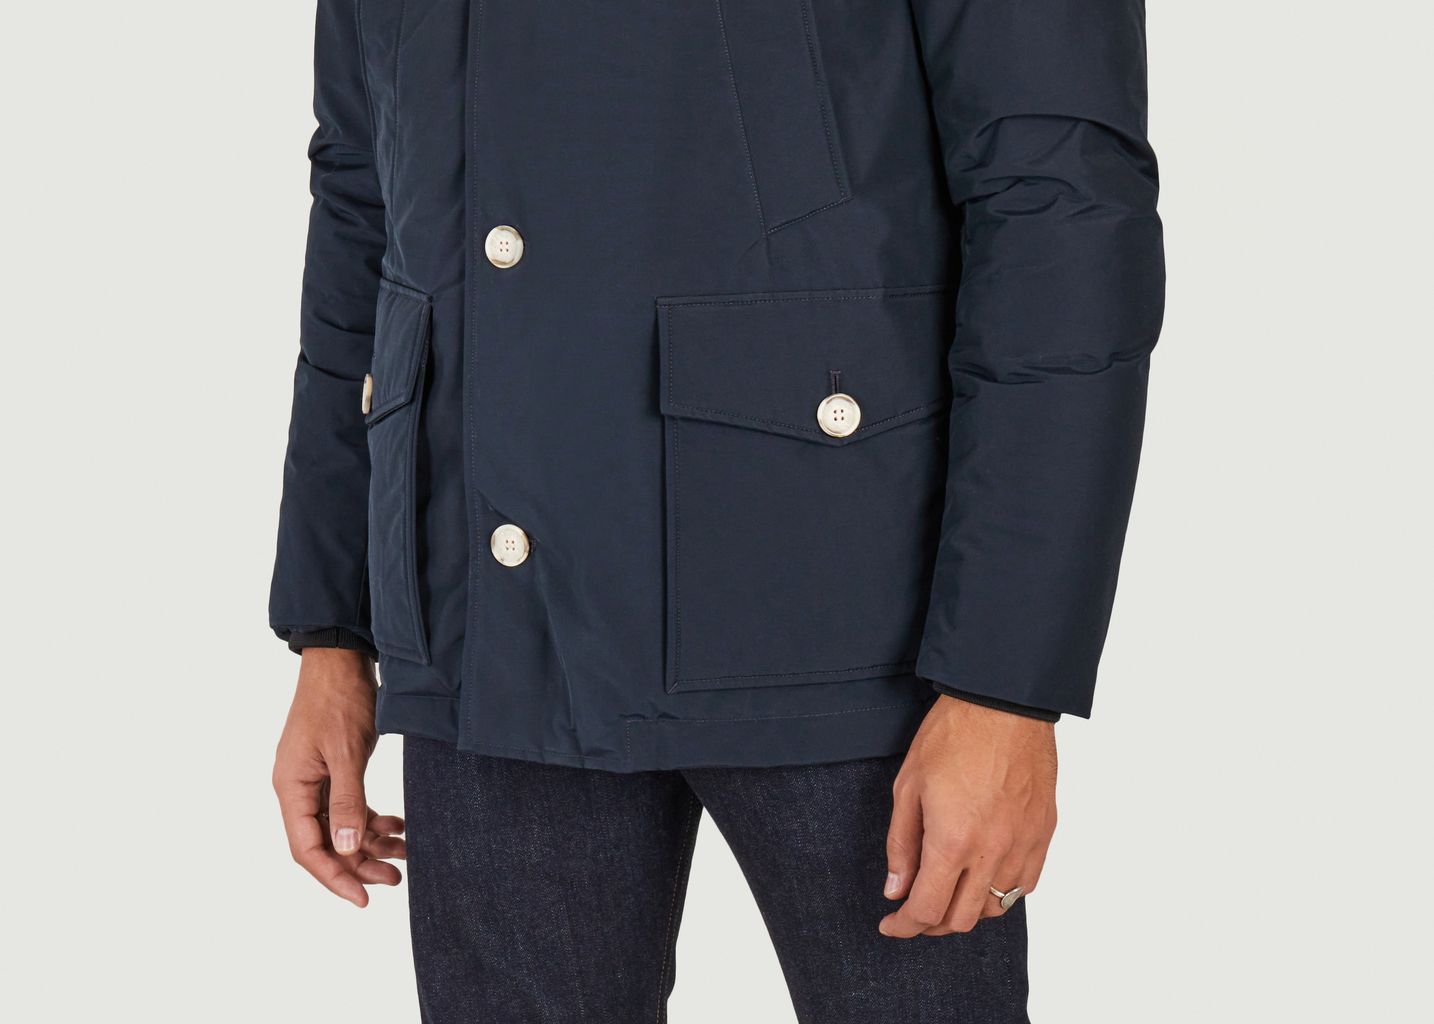 Arctic Anorak with removable fur trim - Woolrich